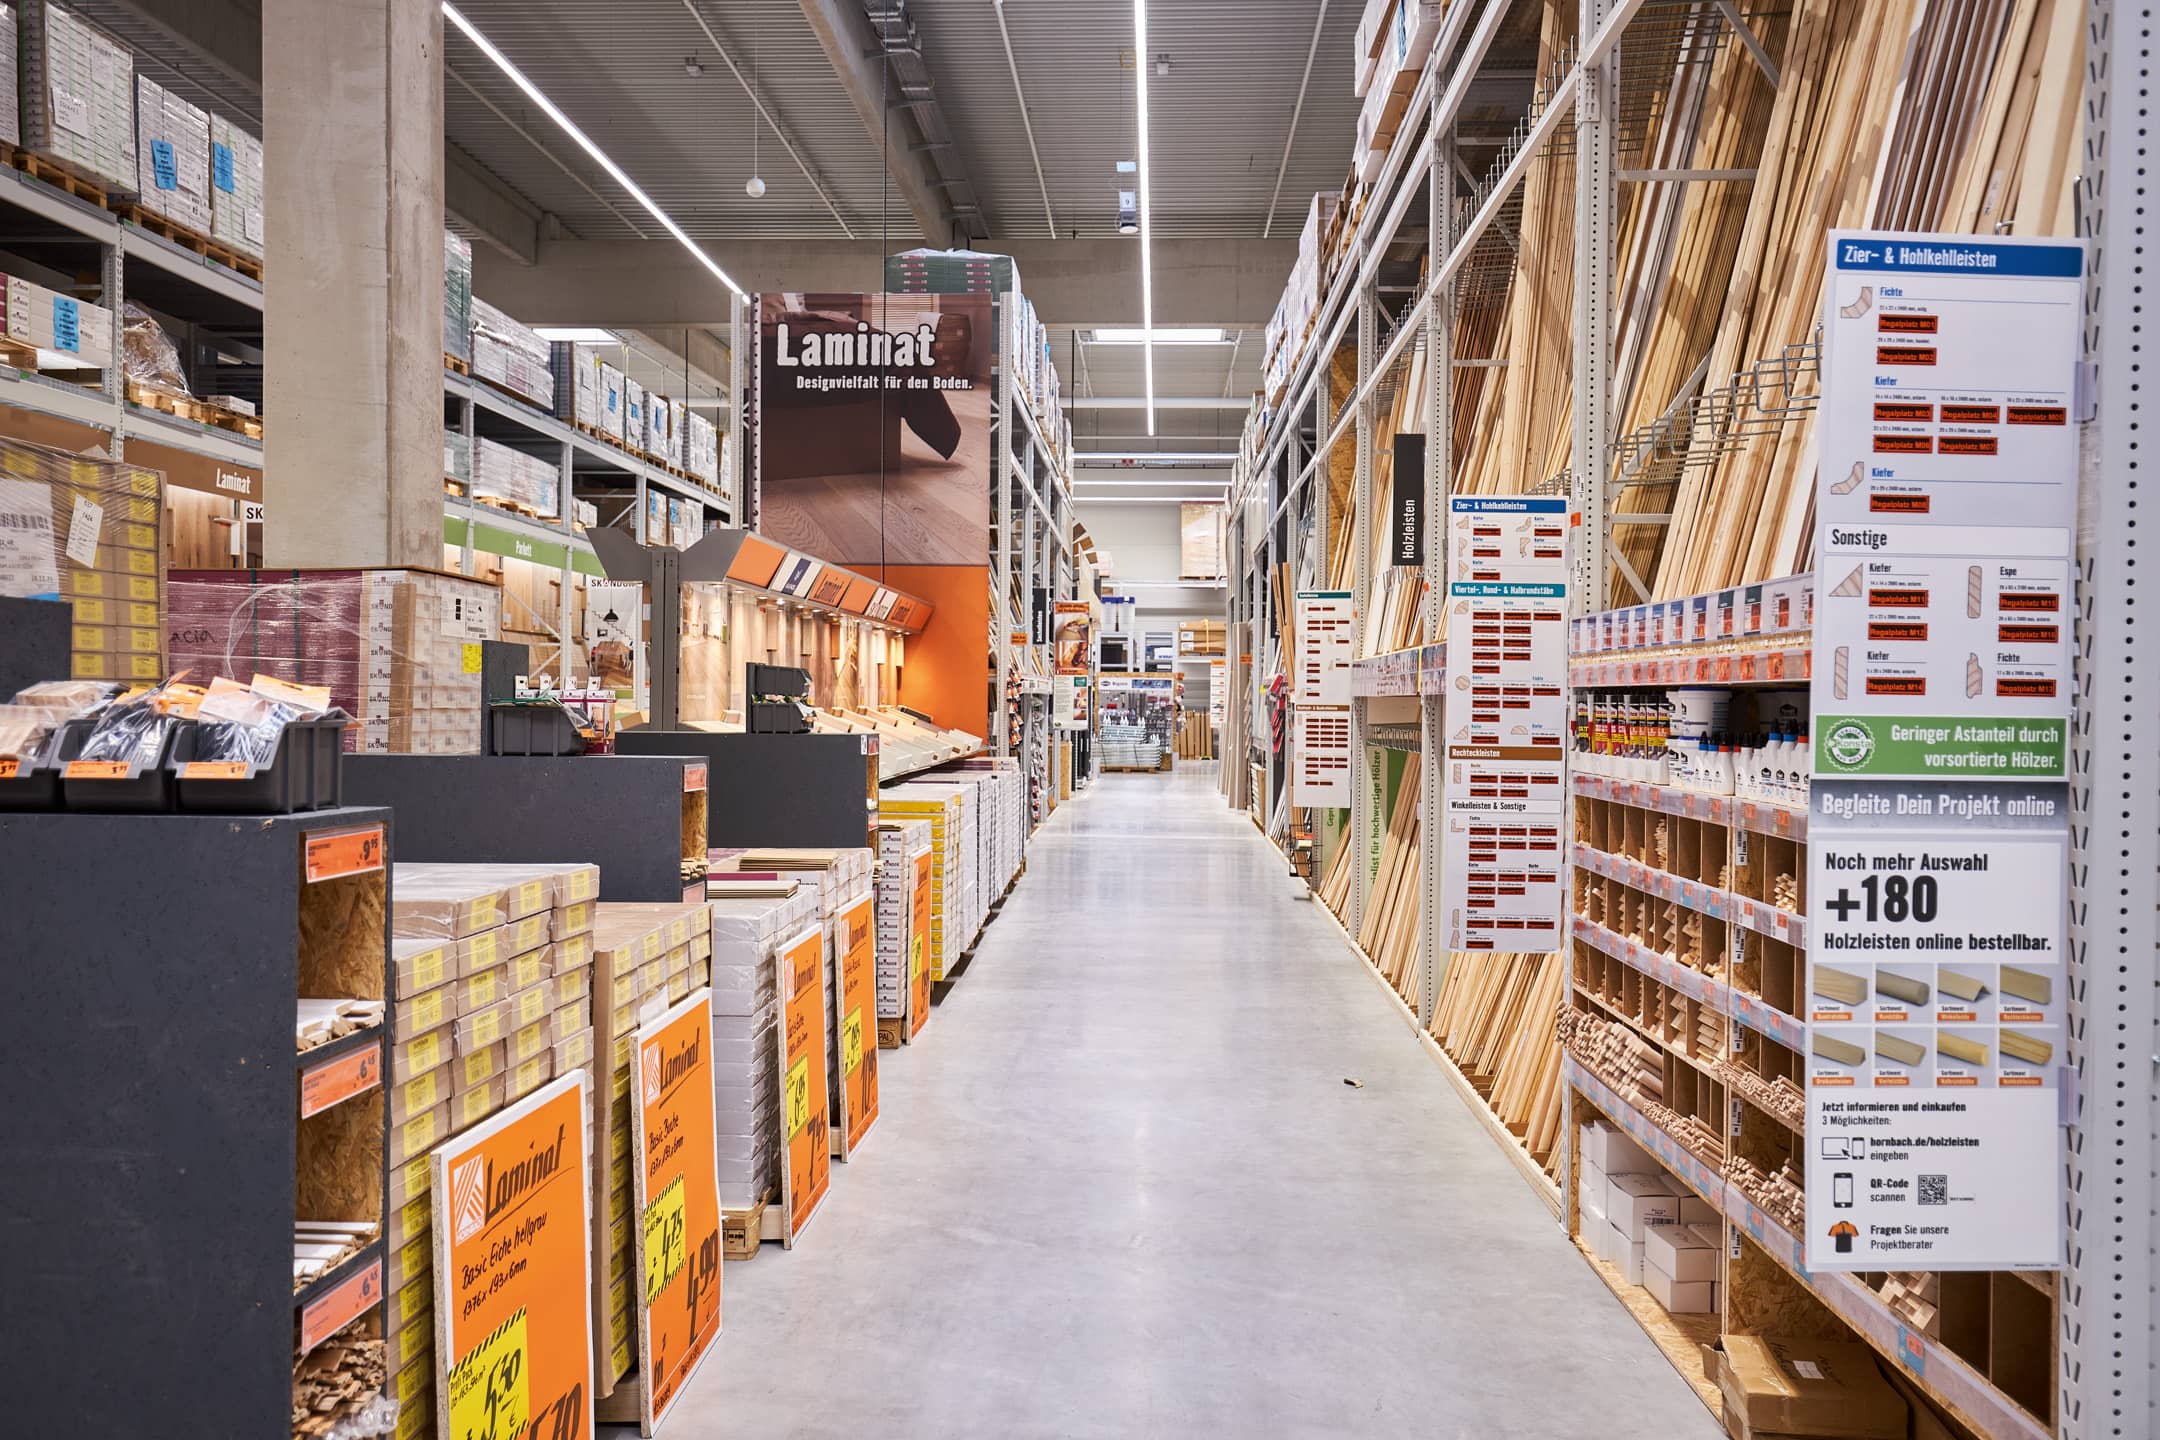 hornbach-holding-investor-relations-equity-story